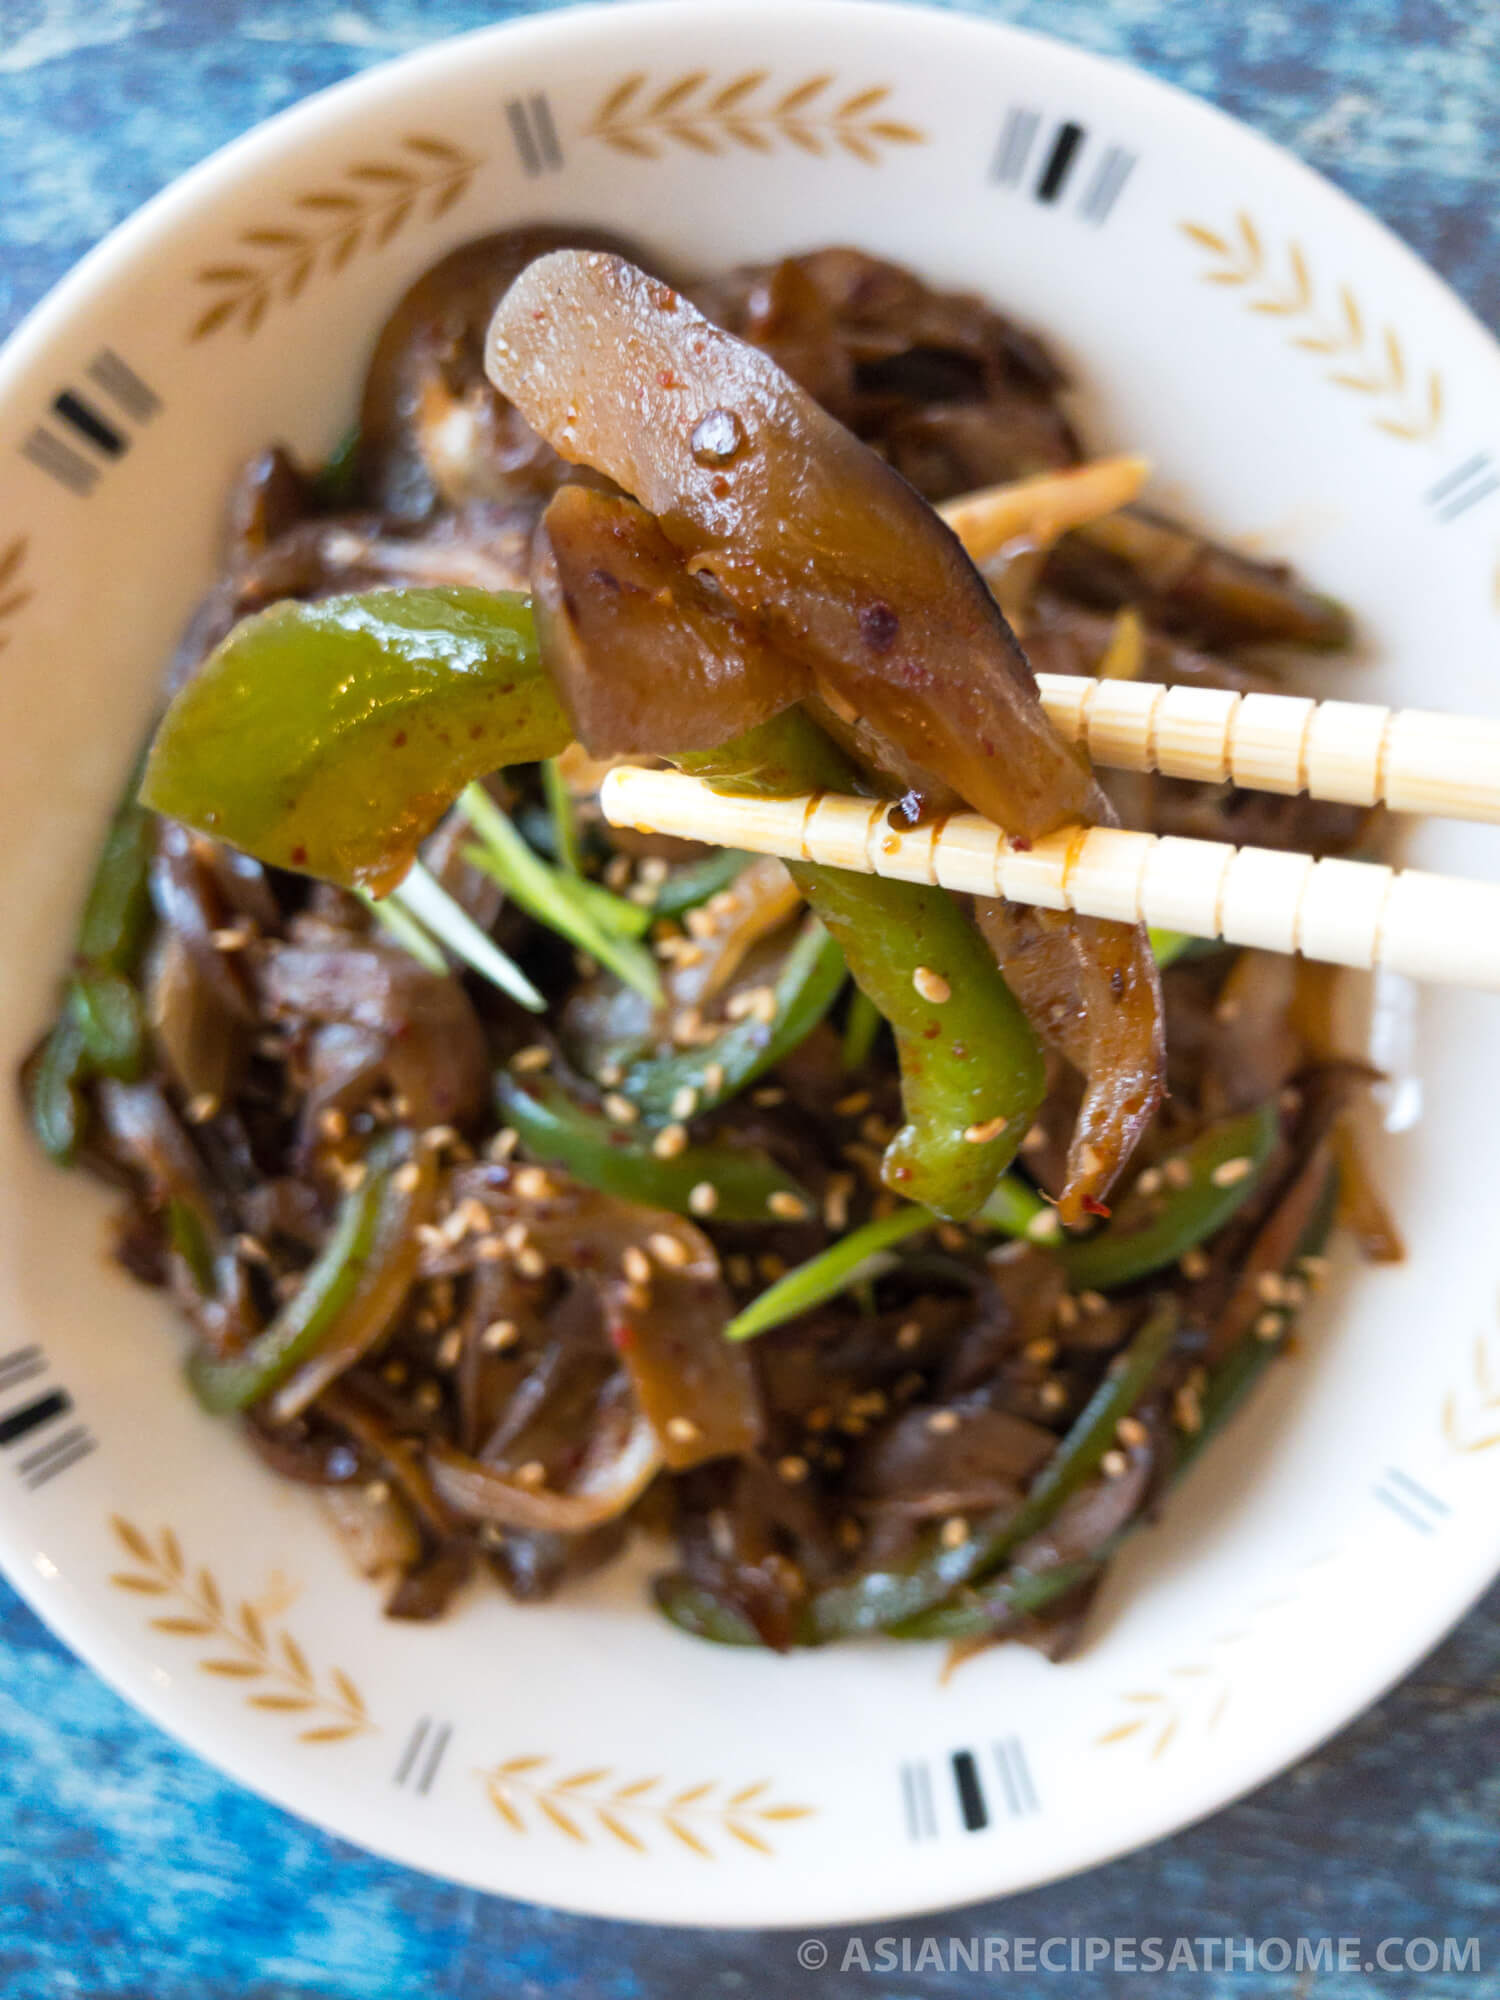 Make our Korean spicy stir-fried eggplant side dish recipe to go with your next meal. This side dish (banchan) is spicy, healthy, and a new spin on how you can prepare eggplants.